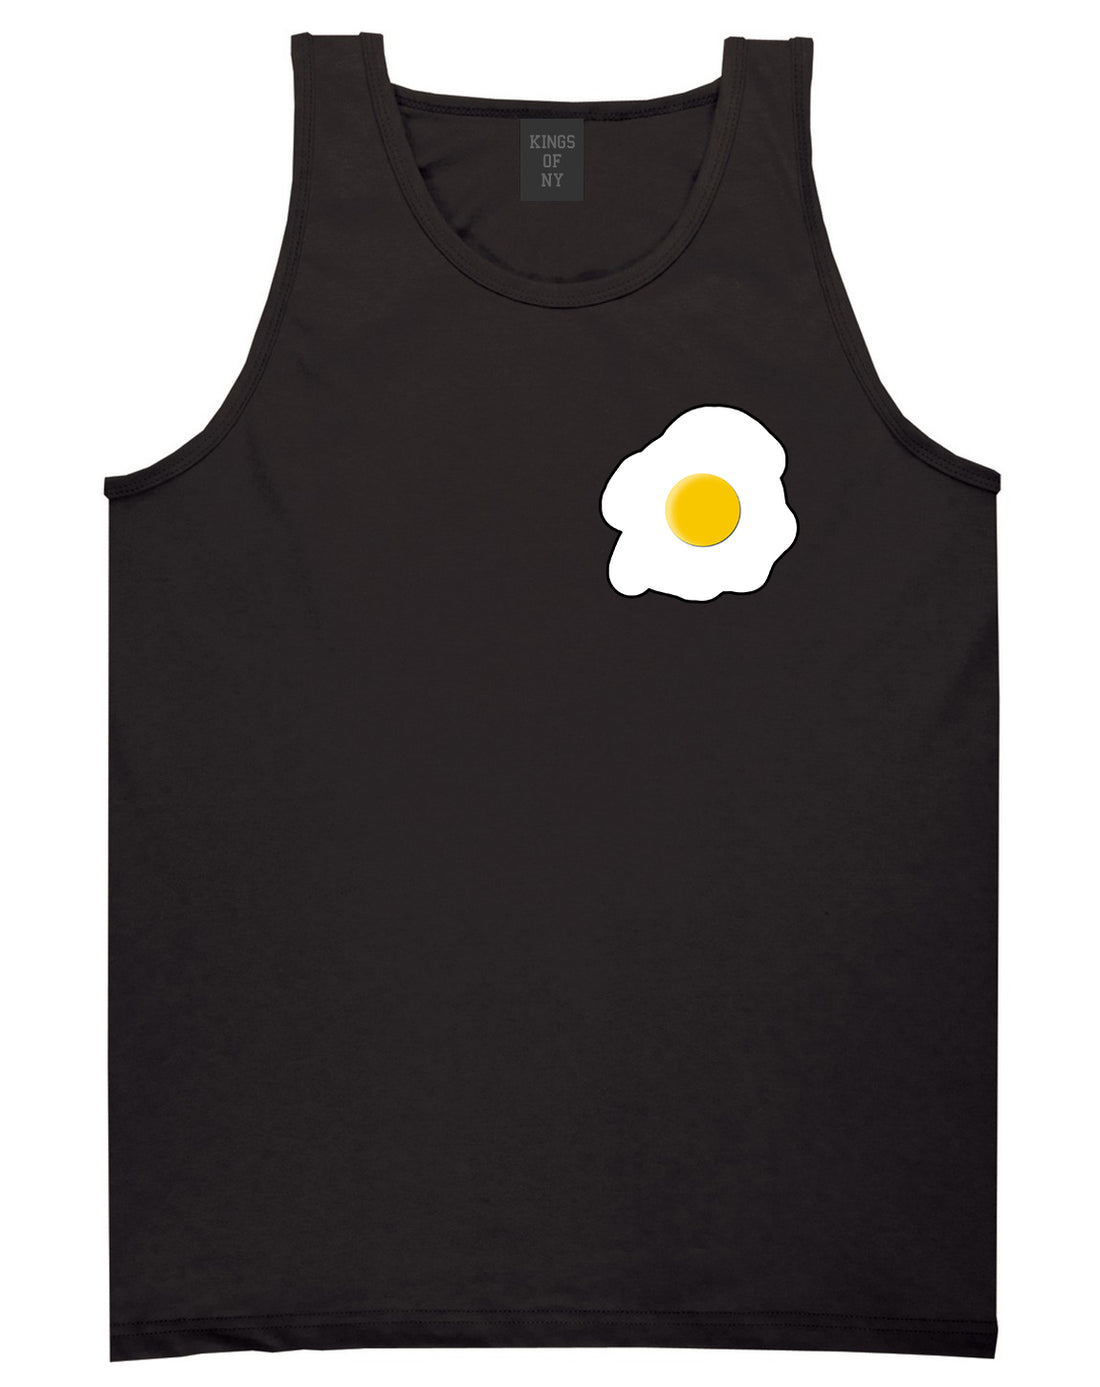 Fried Egg Breakfast Chest Mens Black Tank Top Shirt by KINGS OF NY